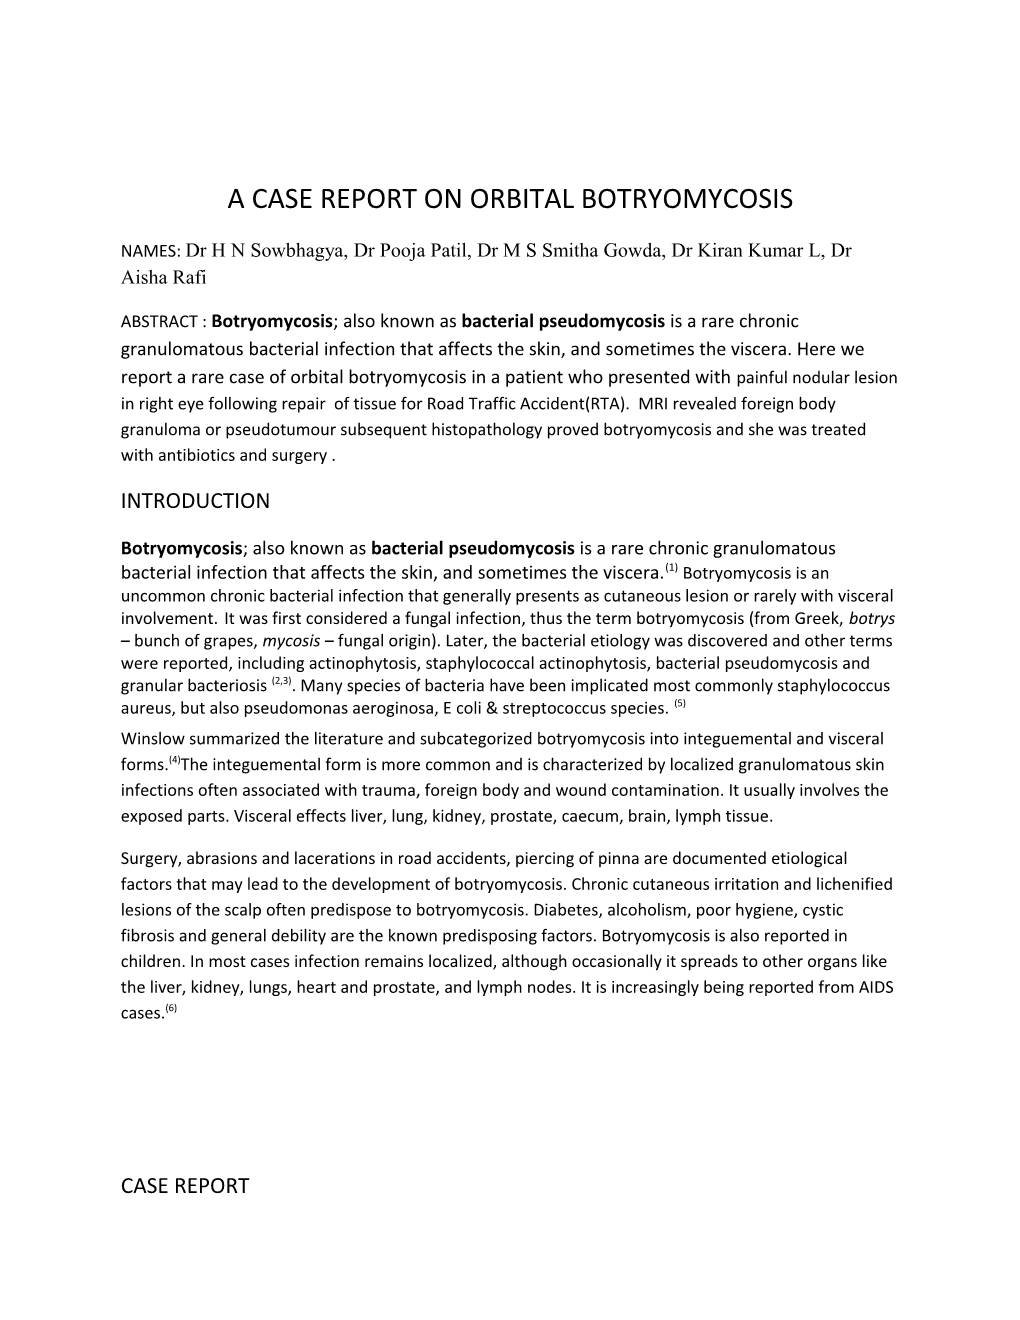 A Case Report on Orbital Botryomycosis